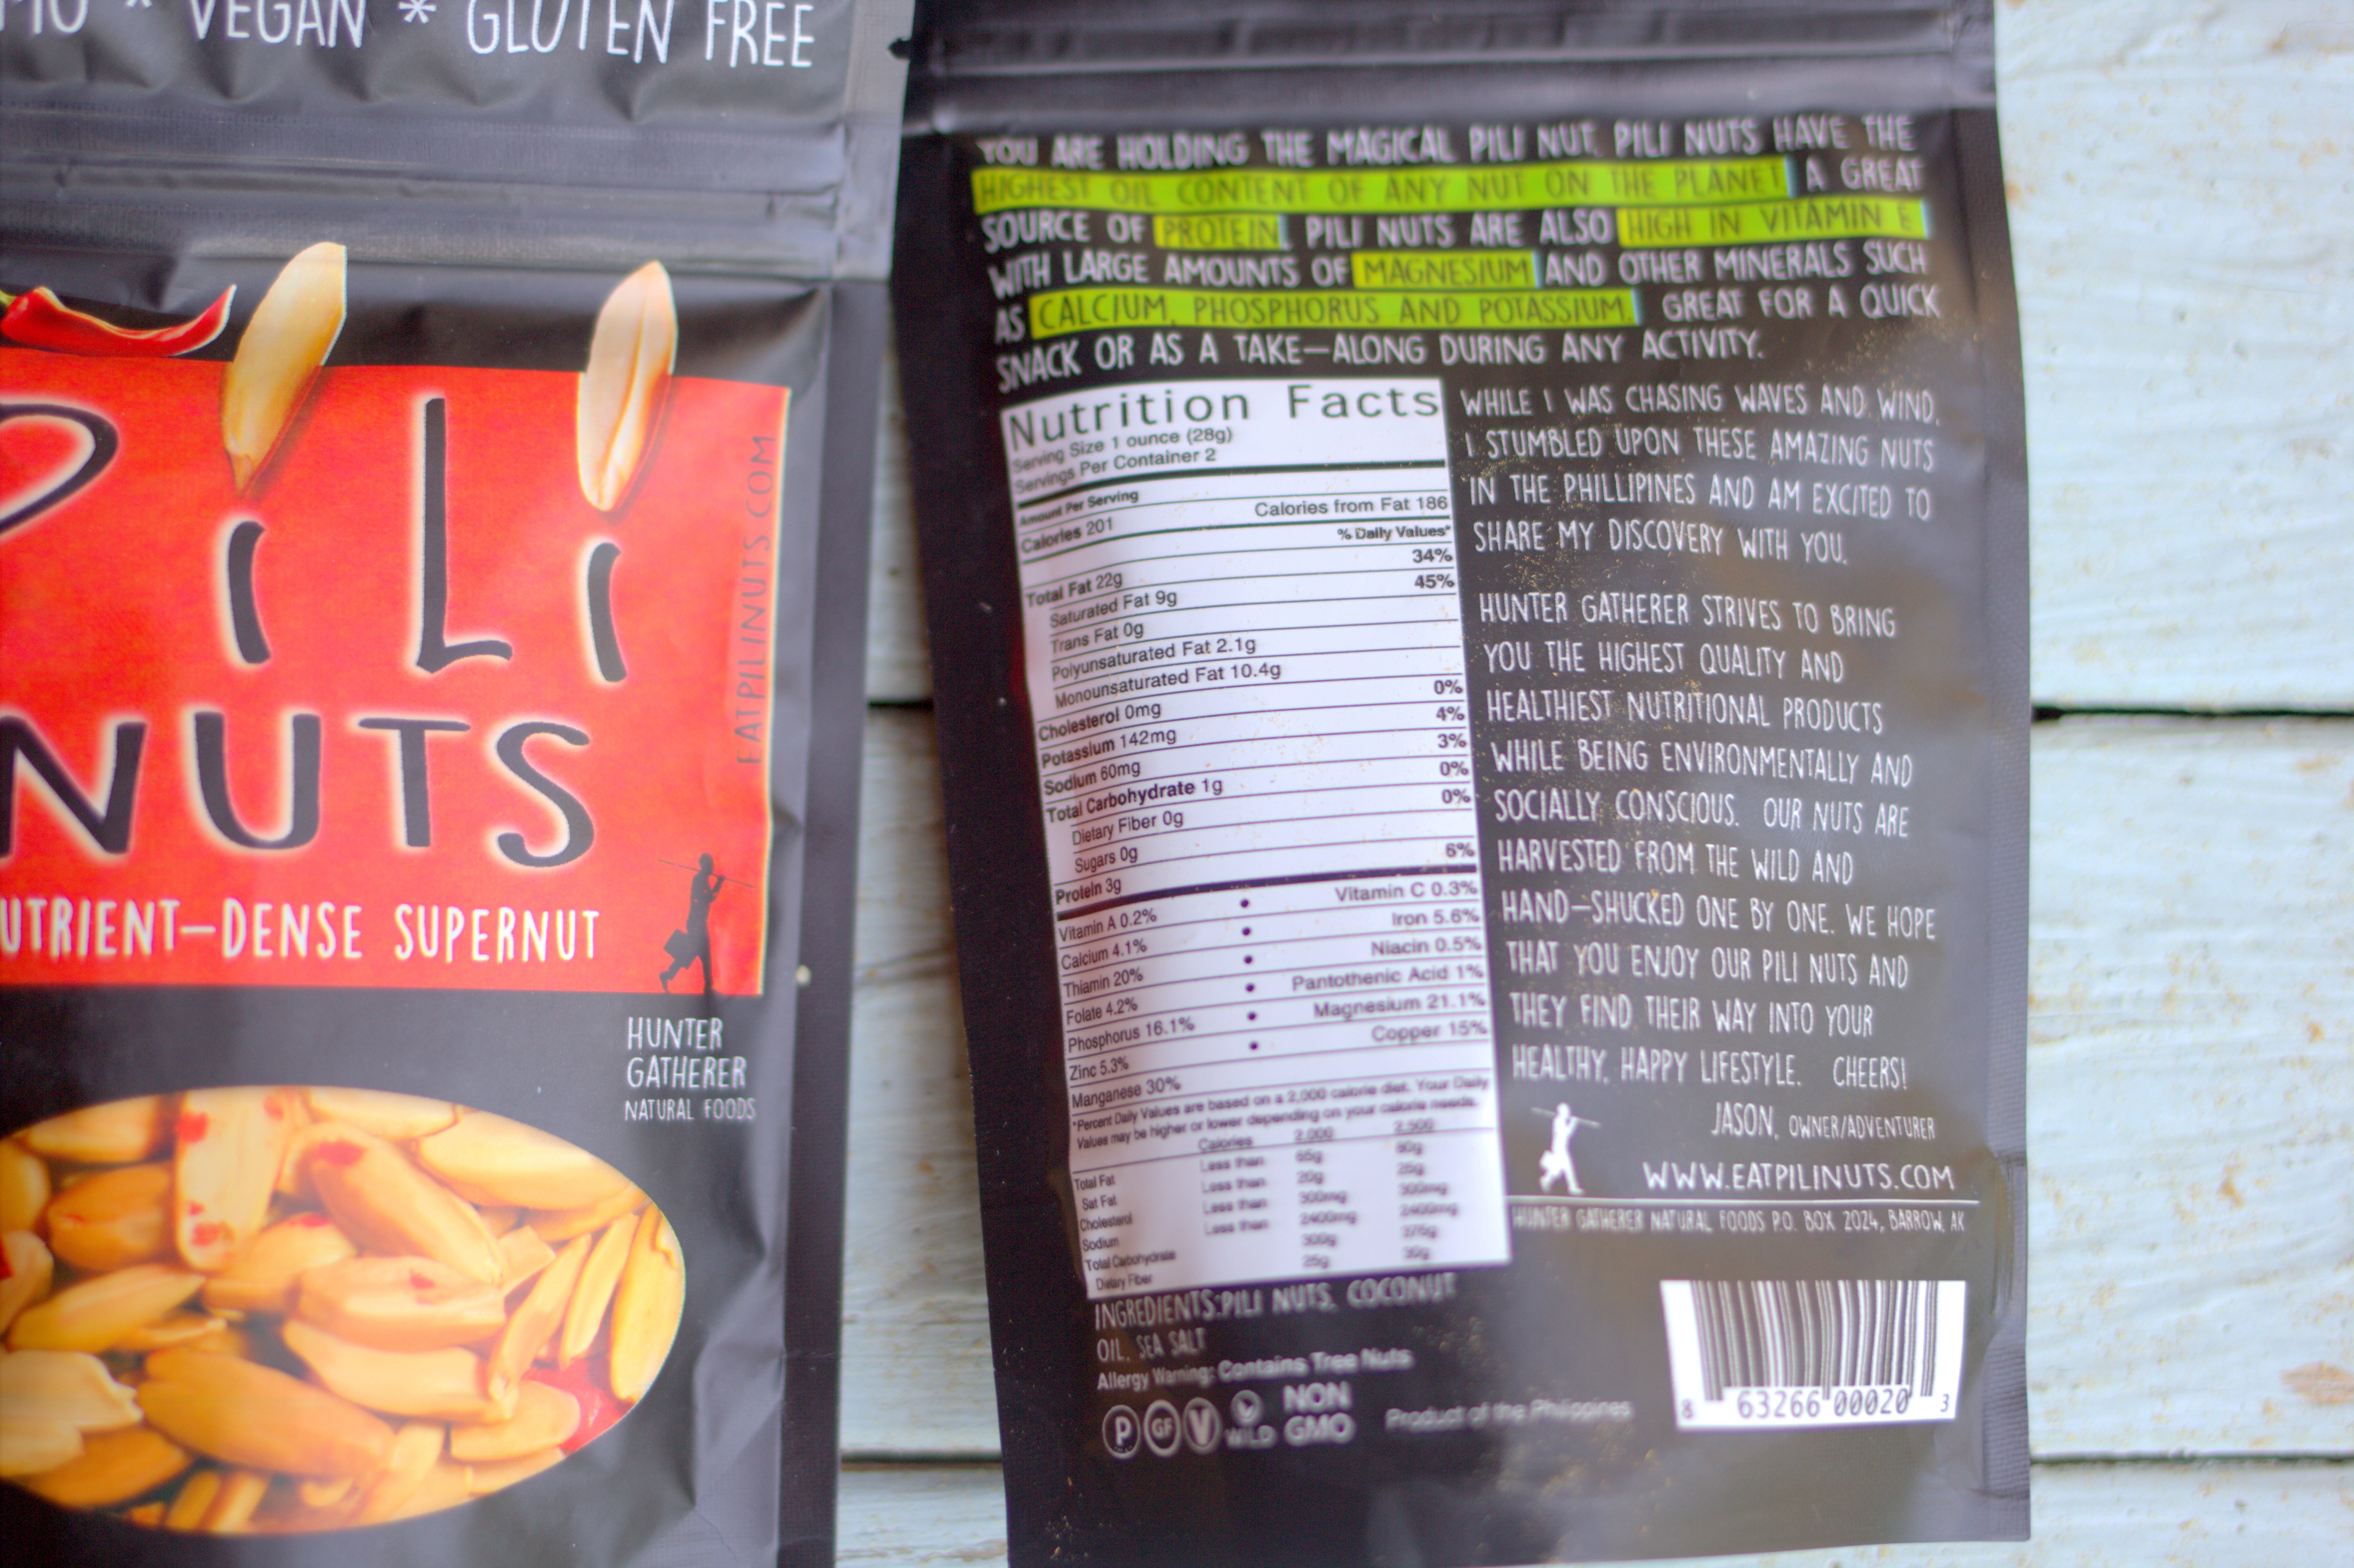 PILI NUTS GIVEAWAY